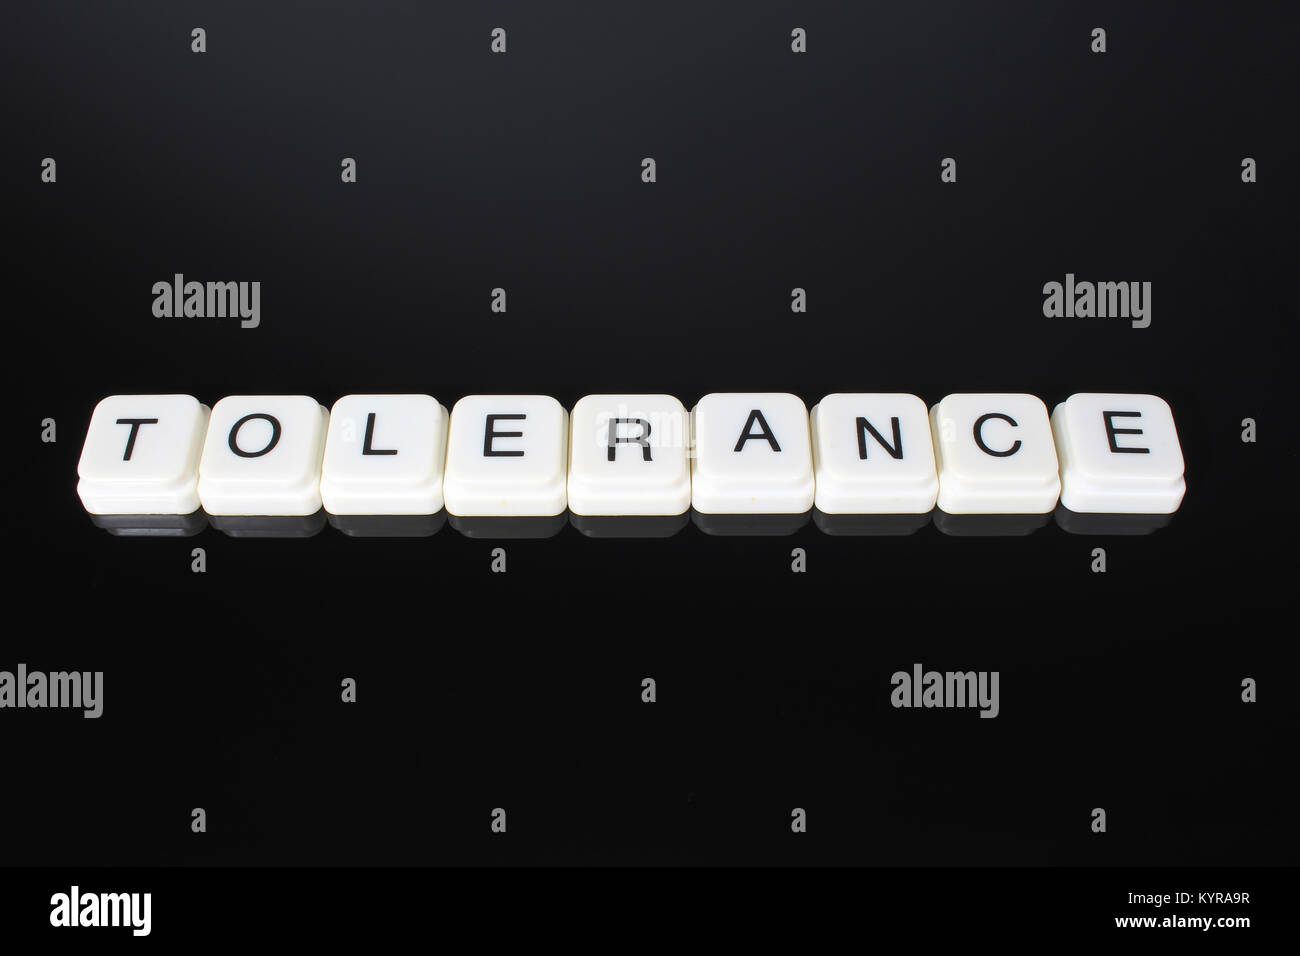 Tolerance text word title caption label cover backdrop background. Alphabet letter toy blocks on black reflective background. White alphabetical letters. White educational toy block with words on mirror table. Stock Photo